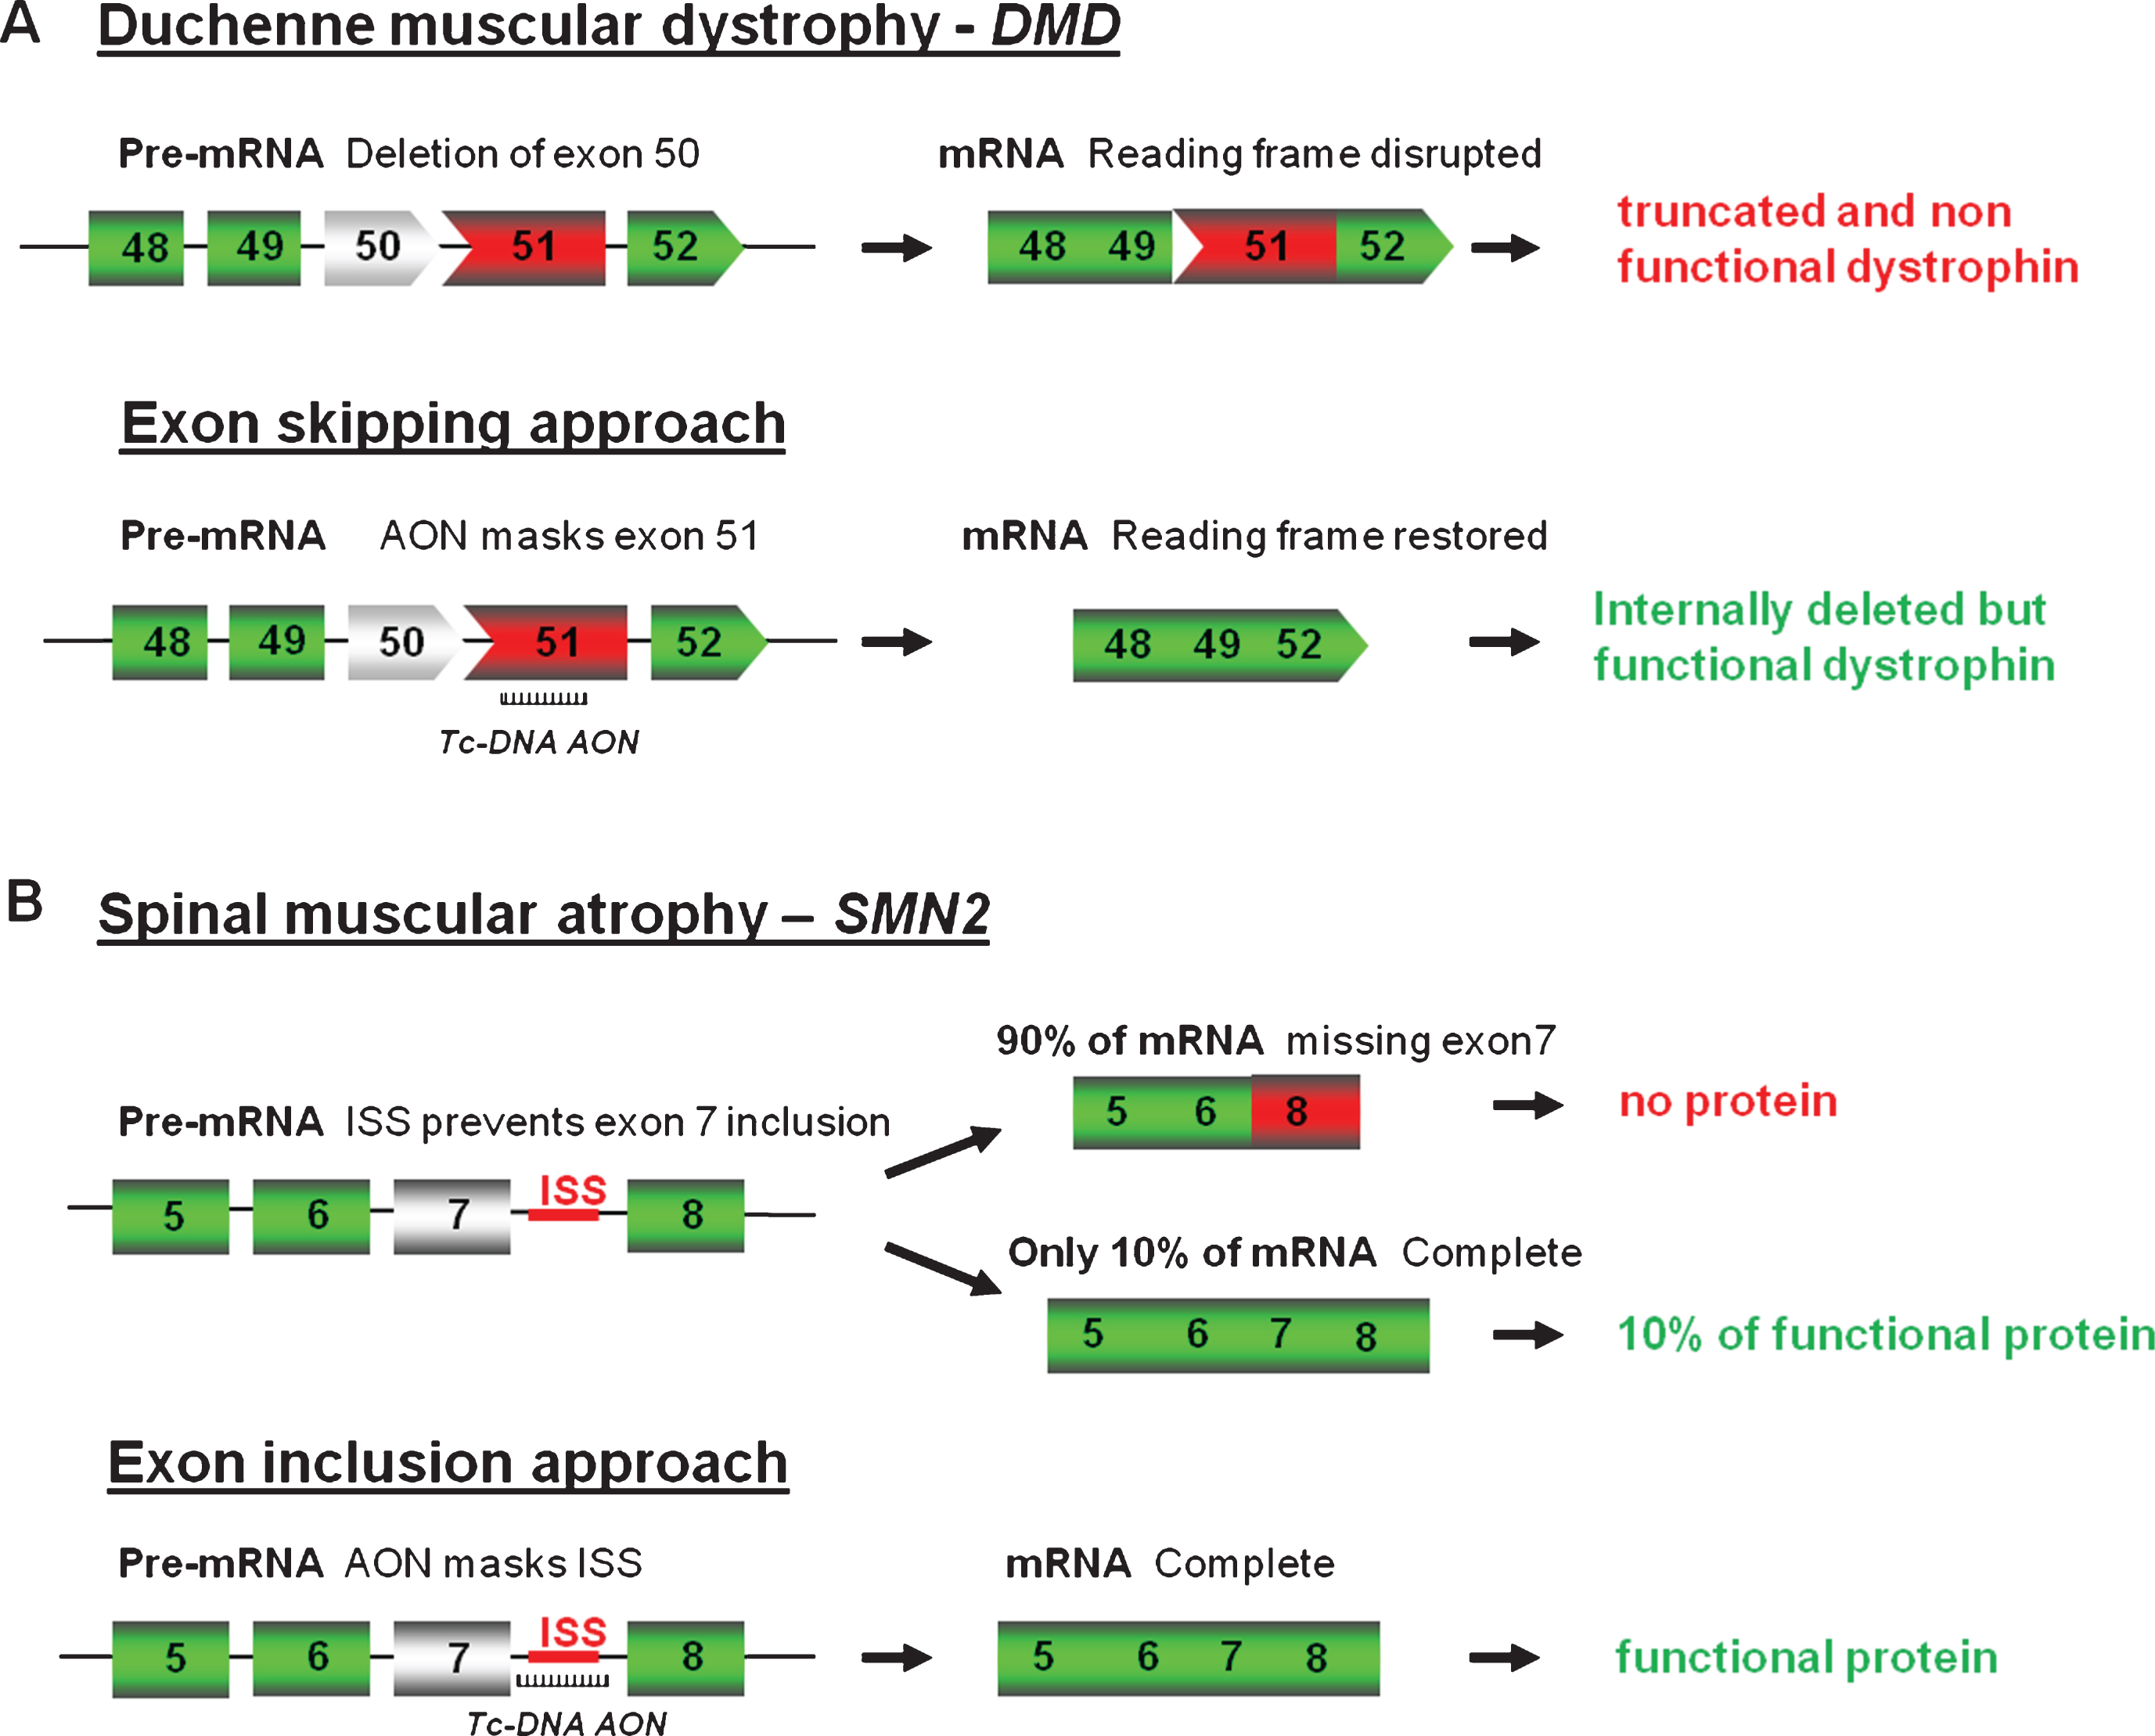 Antisense oligonucleotides mediated splice correction for various neuromuscular diseases. A - Exon skipping rationale for DMD. Patients with DMD carry mutations disrupting the open-reading frame of the dystrophin pre-mRNA. In this example, exon 50 is deleted, creating an out-of-frame mRNA and leading to the synthesis of a truncated non-functional or unstable dystrophin. The tc-DNA AON directed against exon 51 can induce effective skipping of exon 51 and restore the open reading frame, therefore generating an internally deleted but partly functional dystrophin. B – Exon inclusion rationale for SMA. Exon 7 of SMN2 gene is spliced out in 90% of the mature mRNA leading to only 10% of functional SMN protein. Tc-DNA AON can mask the ISS inducing inclusion of exon 7 and leading to a functional SMN protein.